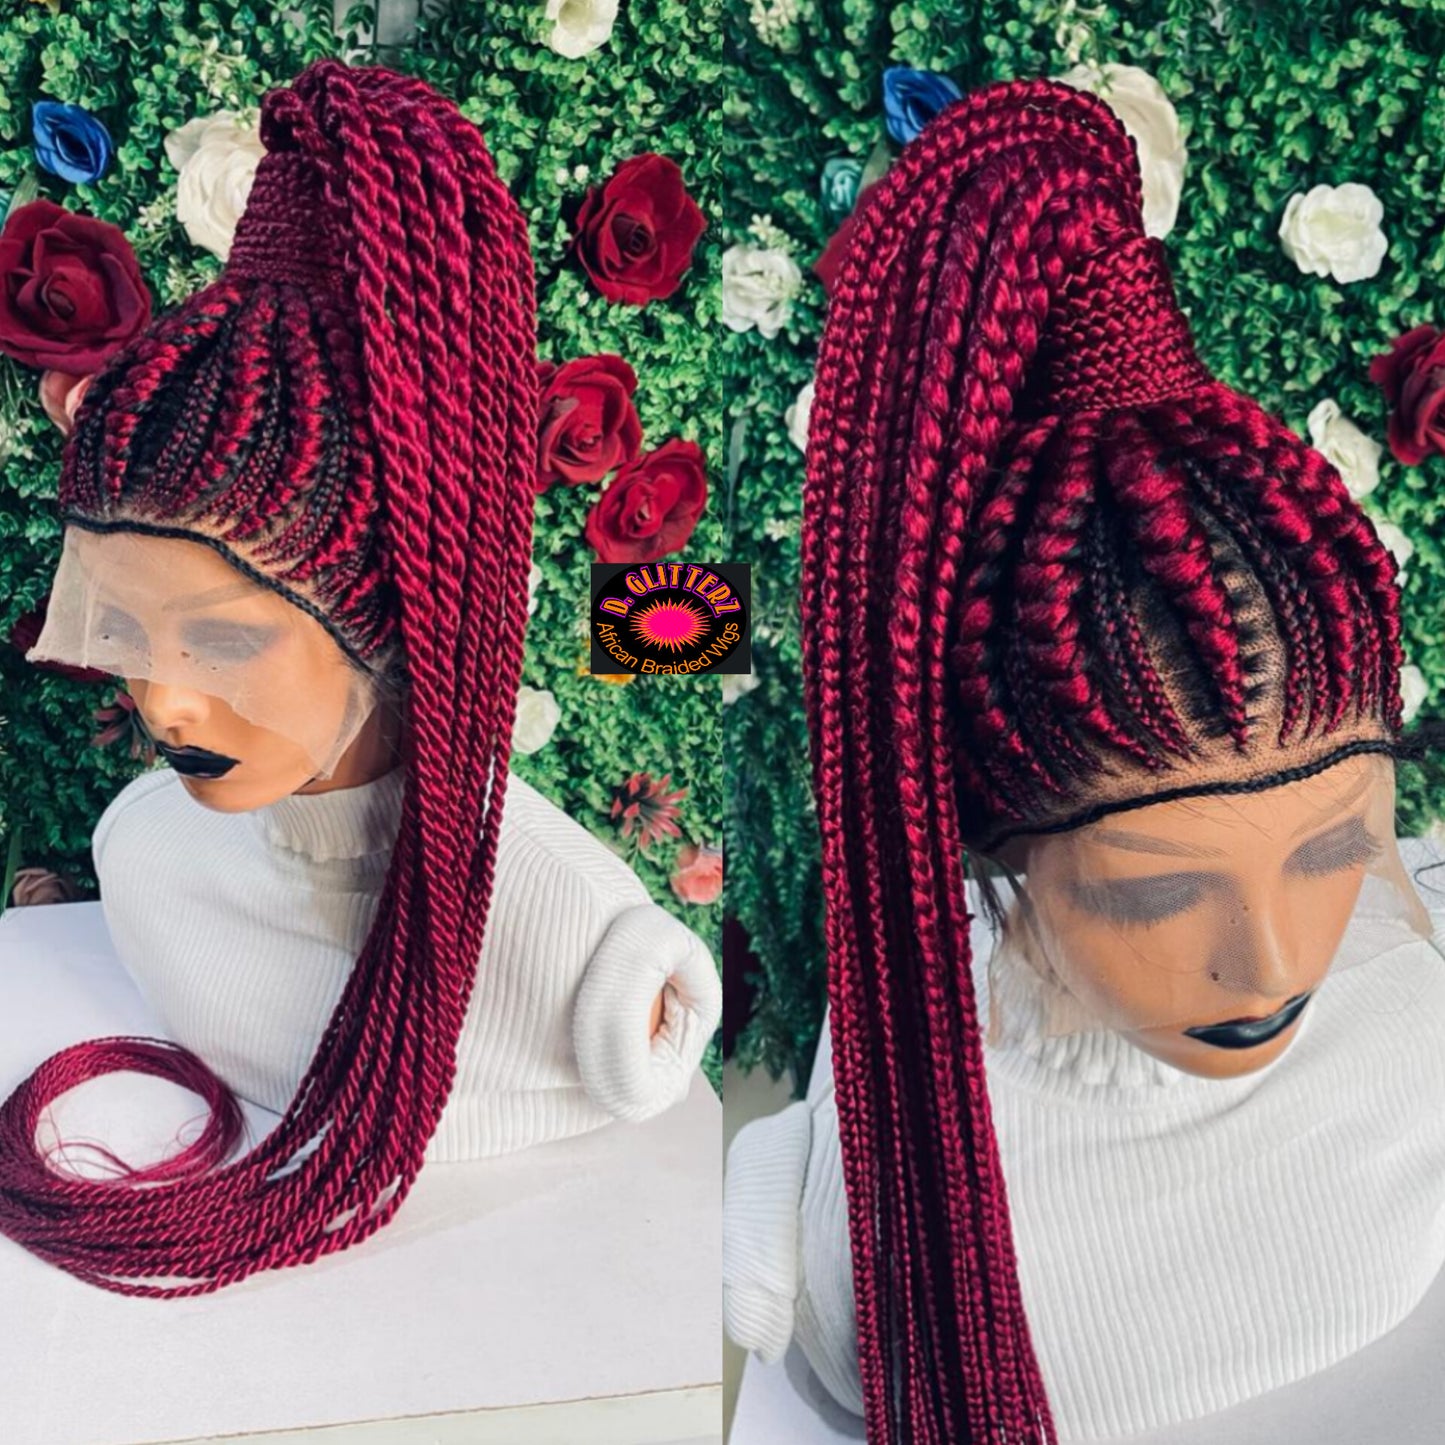 PONYTAIL BRAIDED  CONROW WIGS  ON  360 LACE CLOSURE